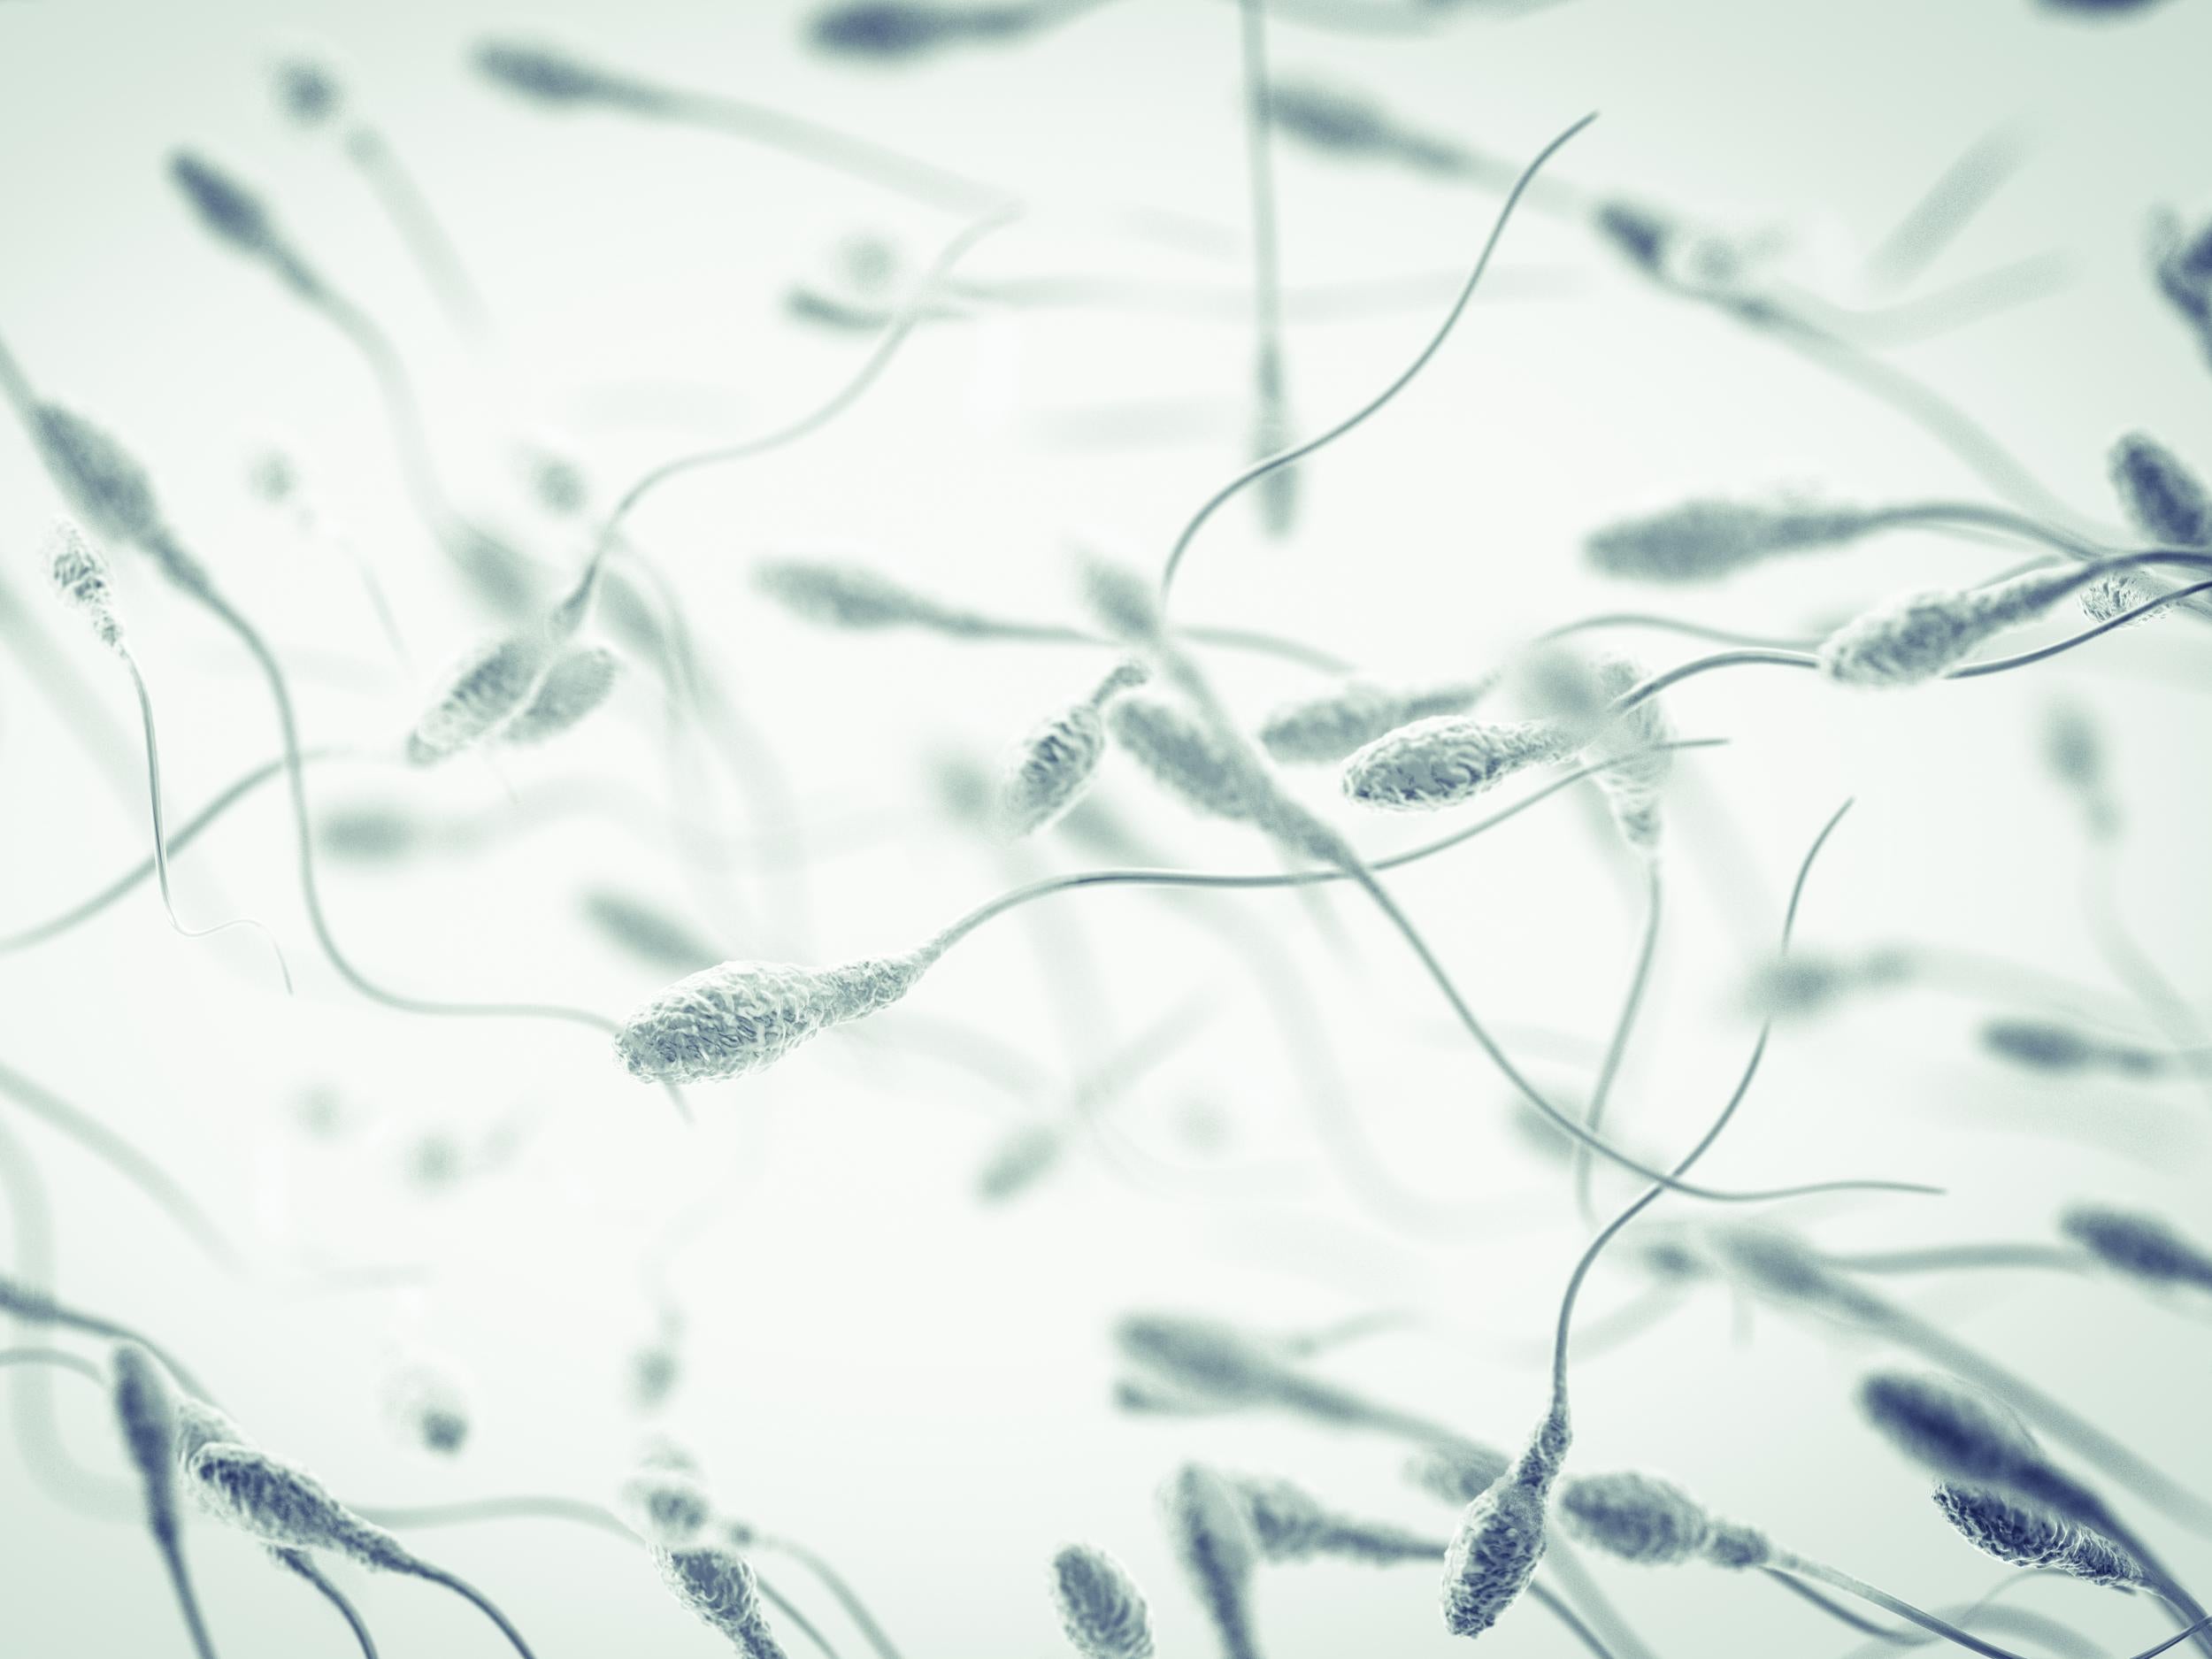 Exposure to air pollution may result in abnormally shaped sperm cells